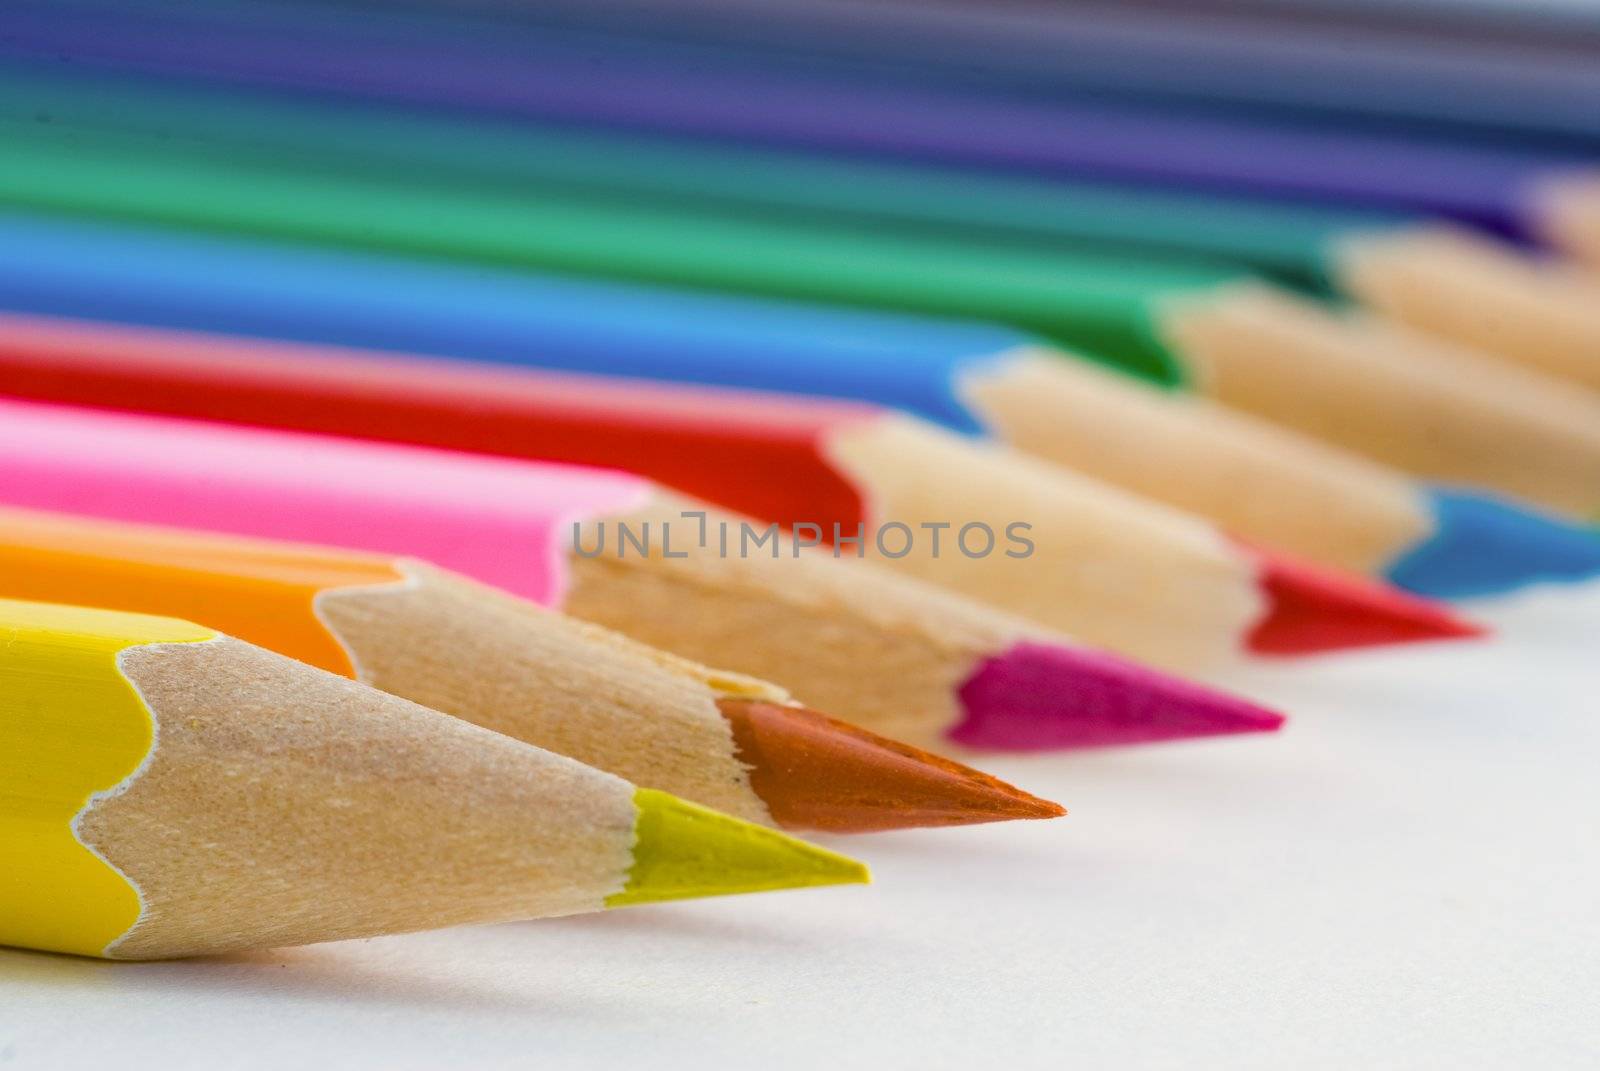 Colored crayons by pmisak